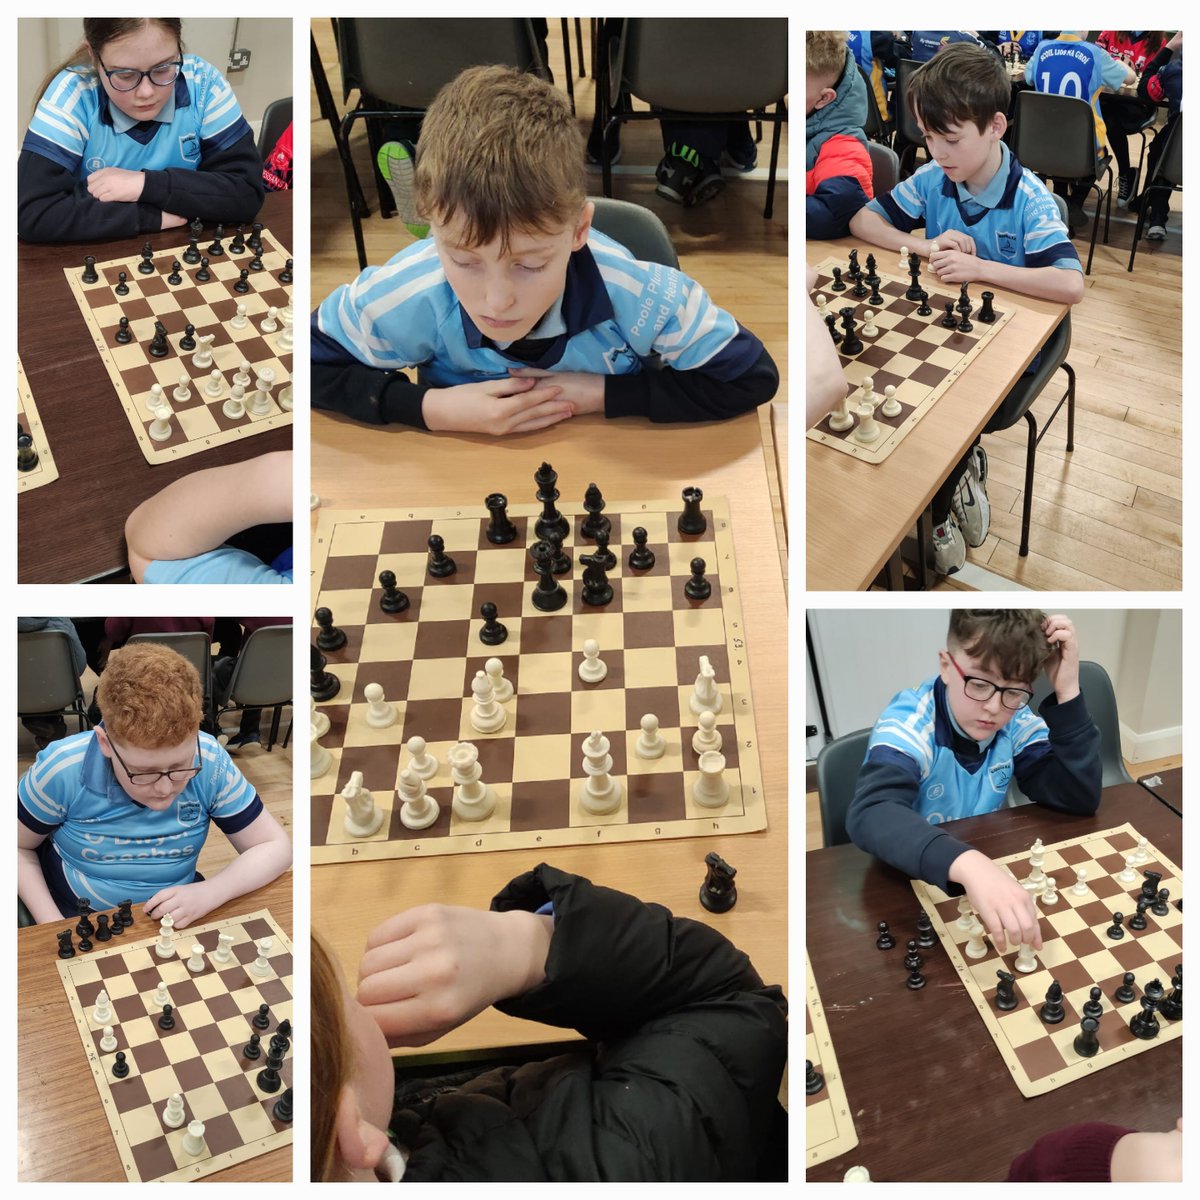 We had a brilliant day at the Féile @Ficheall_ie Chess Competition in Monard on Friday. Thanks to all the partaking schools for the fun and enthusiasm @lisnagryns @monardns1 @MungretNS Shronell NS Scoil Iosagáin